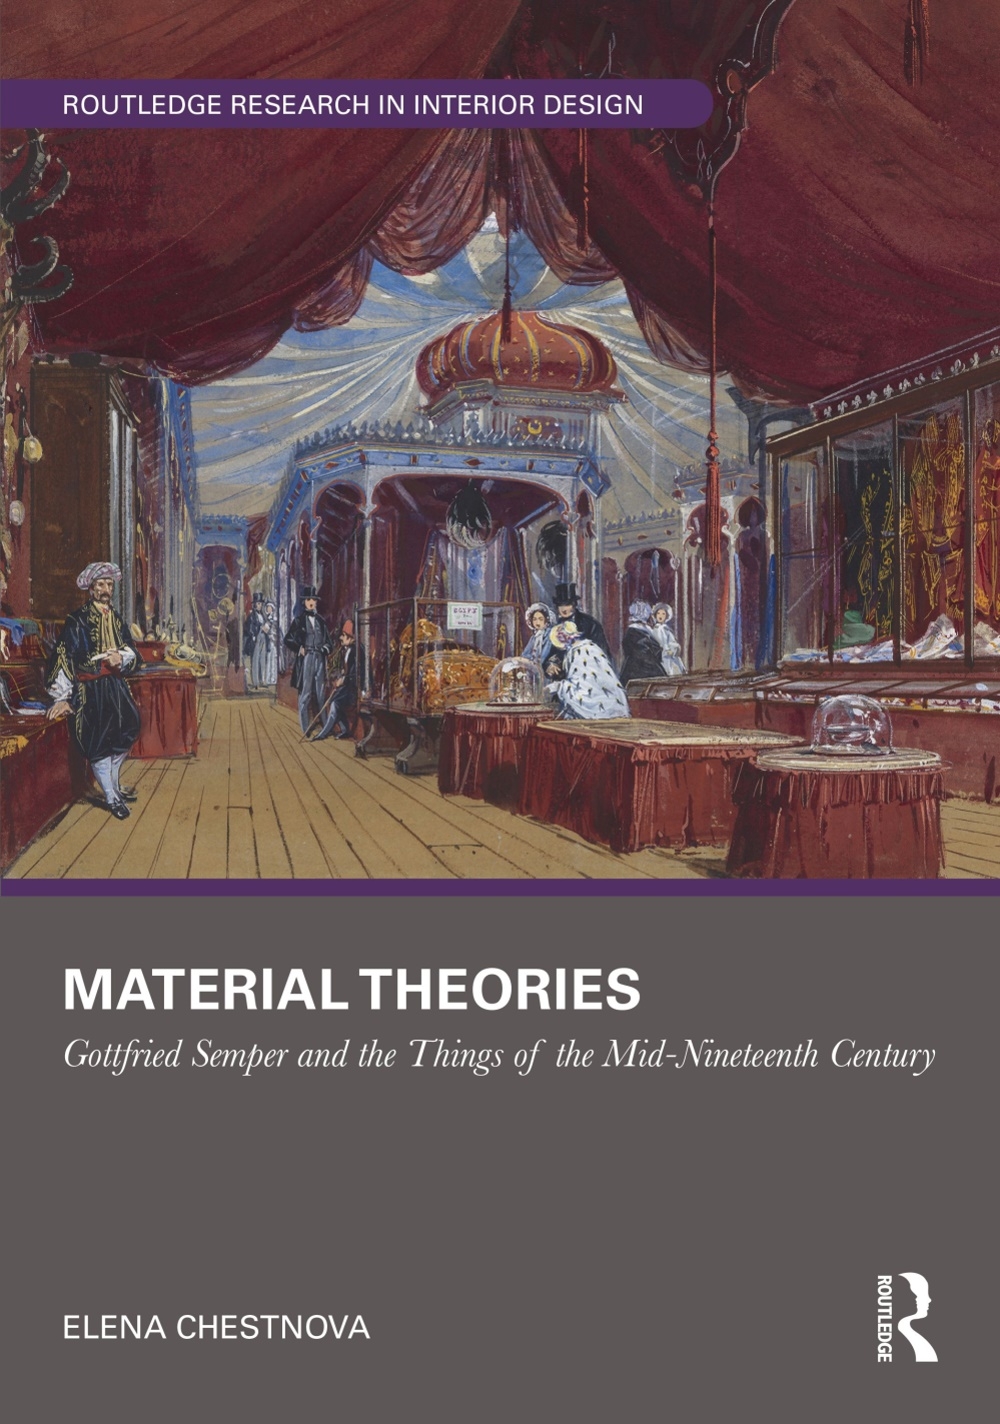 Material Theories: Locating Artefacts and People in Gottfried Semper’s Writings